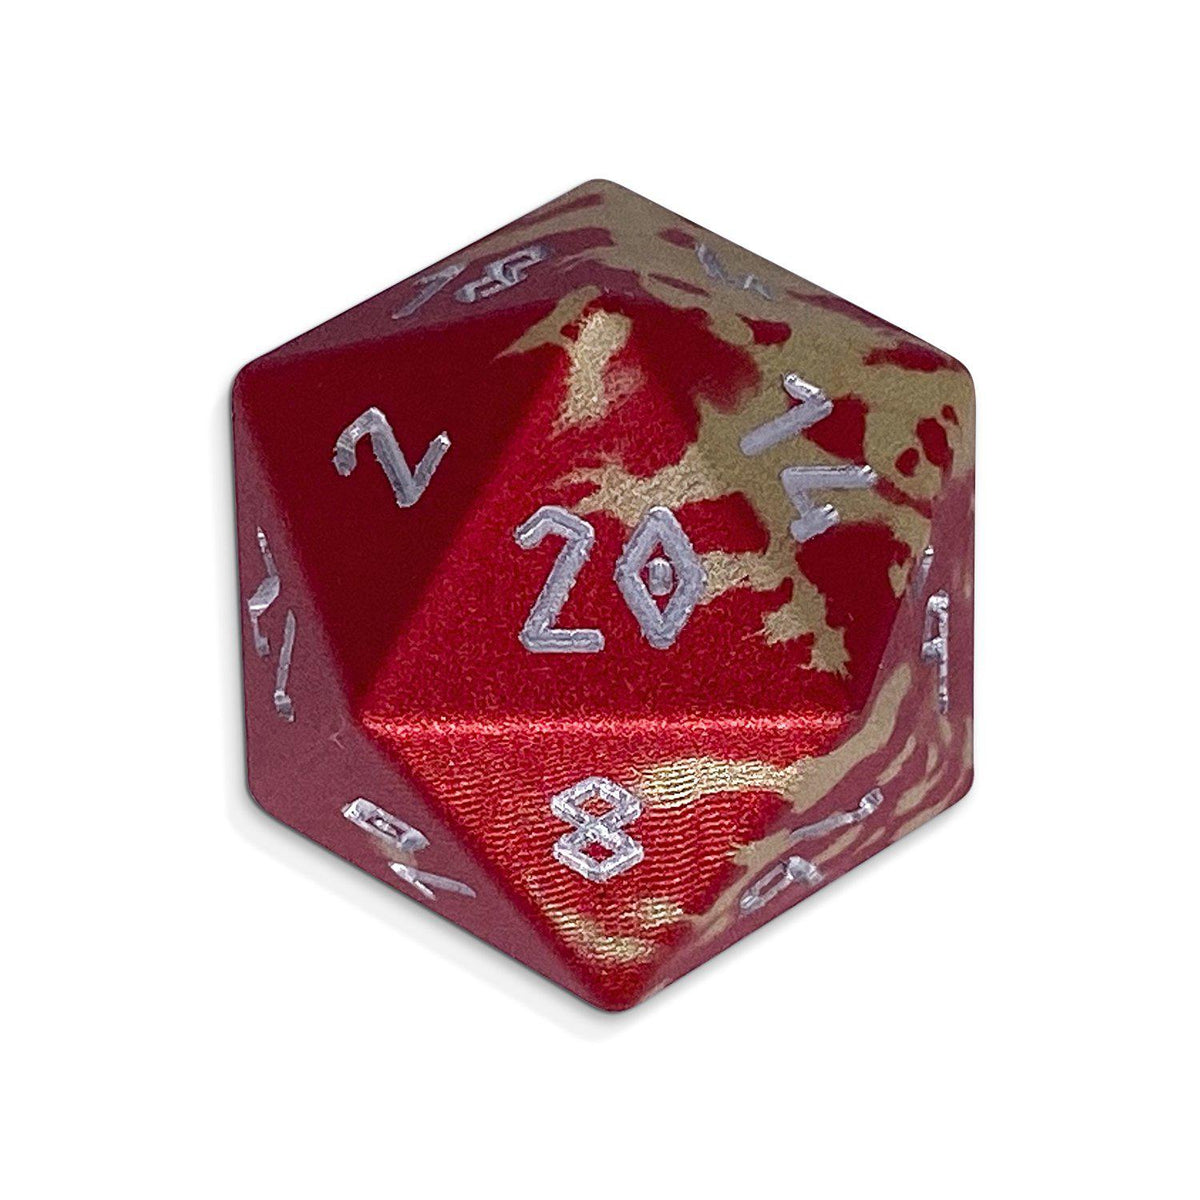 Single Wondrous Dice® D20 in Firebolt by Norse Foundry 6063 Aircraft Grade Aluminum